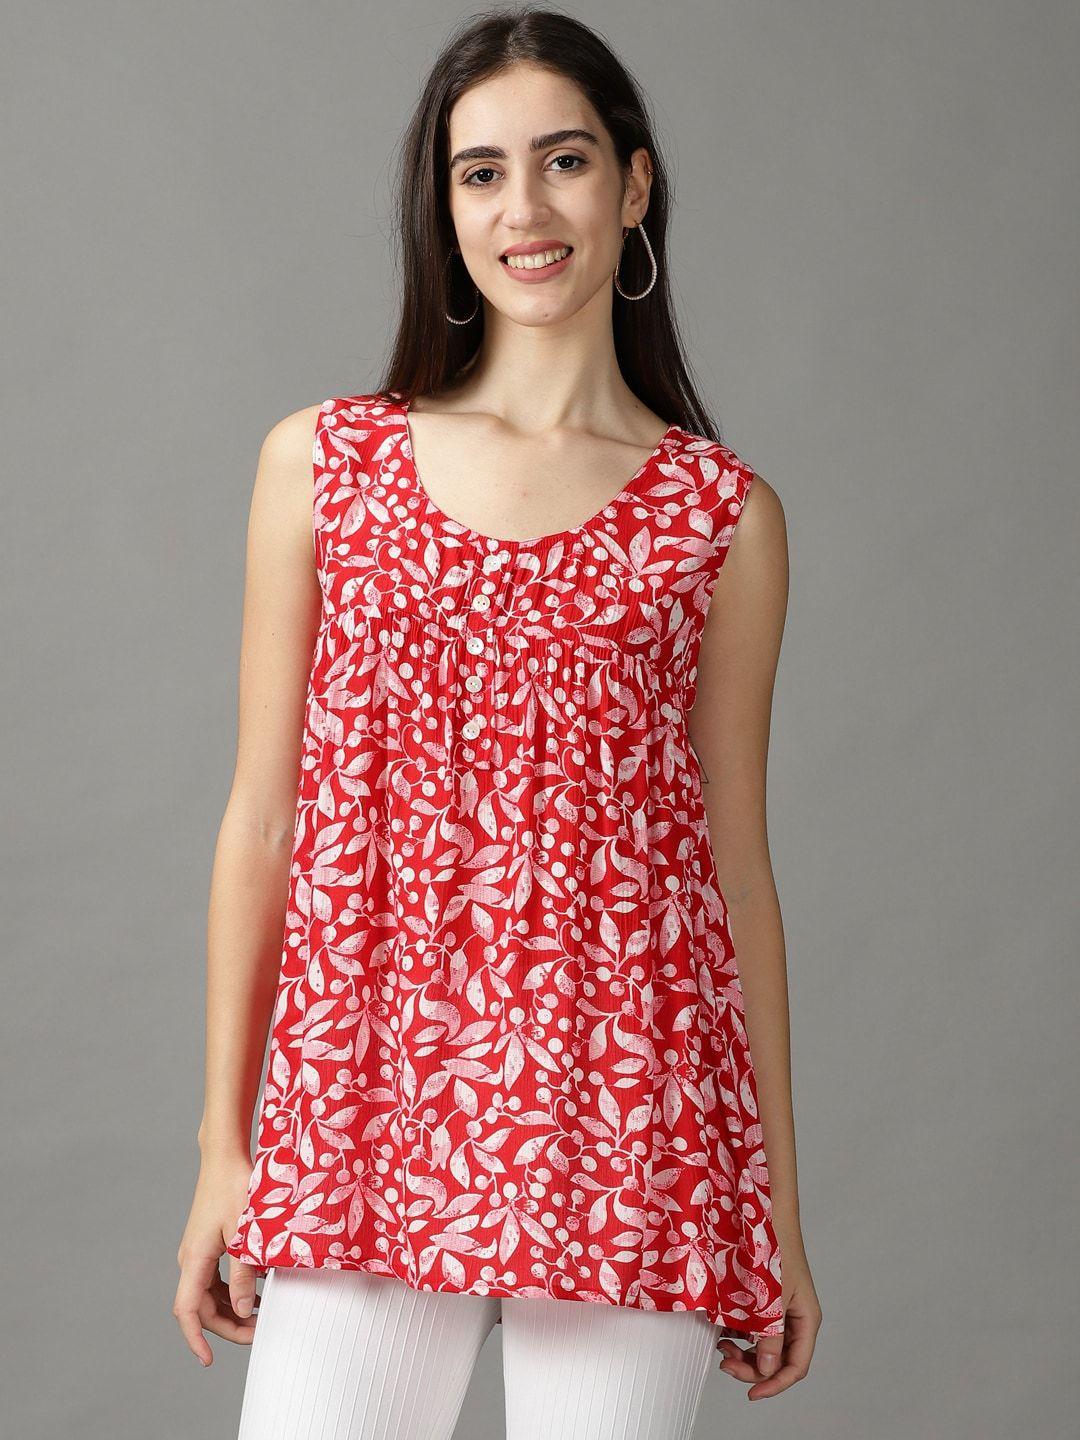 showoff red tropical print tropical top